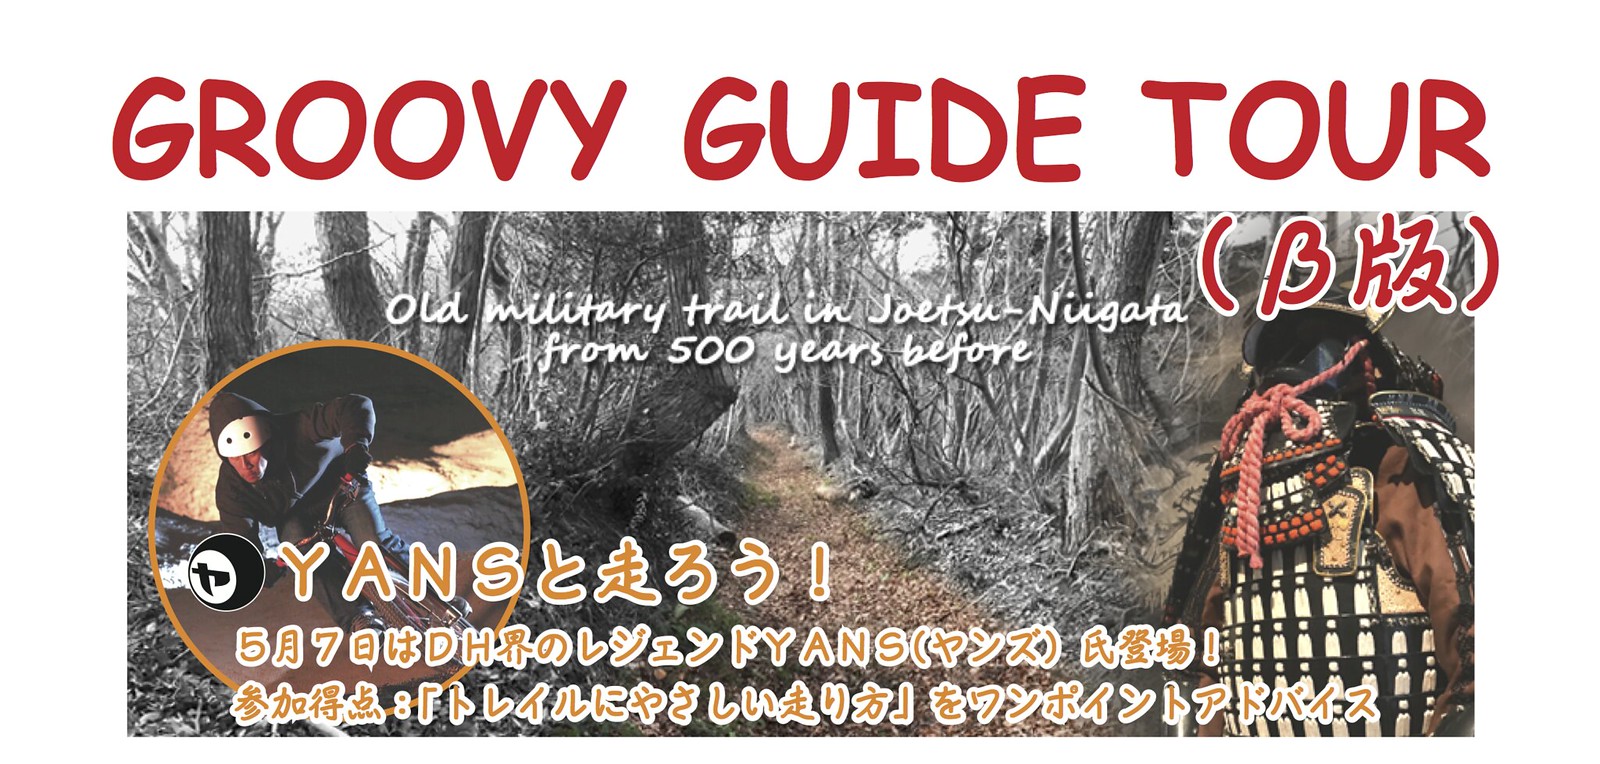 5/7 GROOVY GUIDE TOUR に行きます